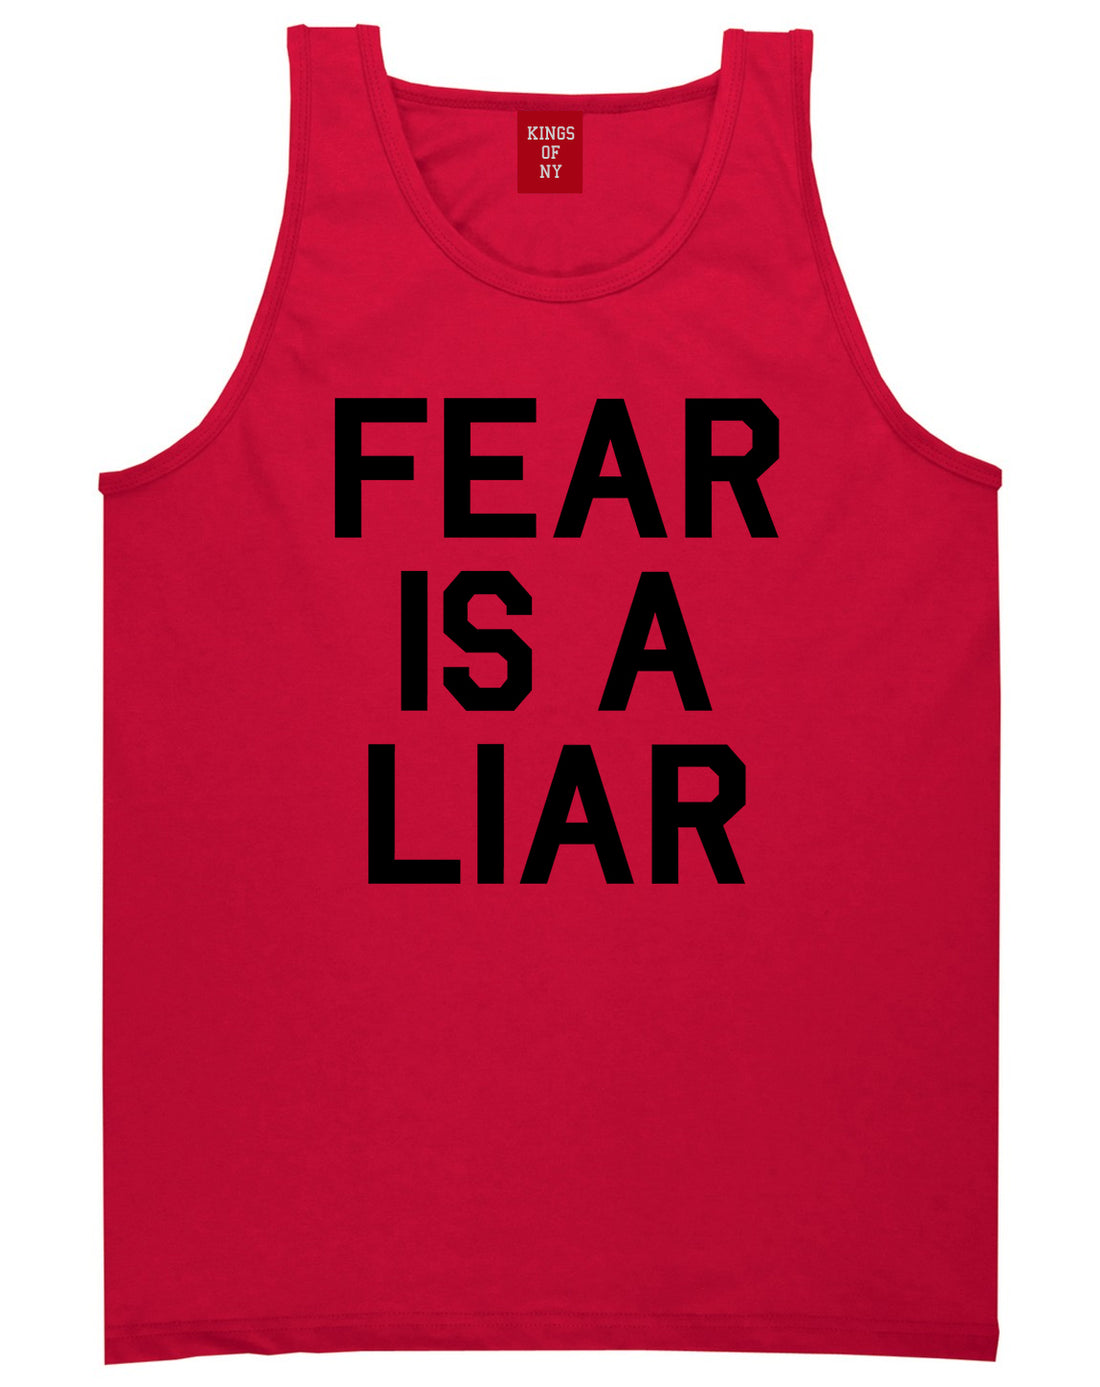 Fear Is A Liar Motivational Mens Tank Top Shirt Red by Kings Of NY